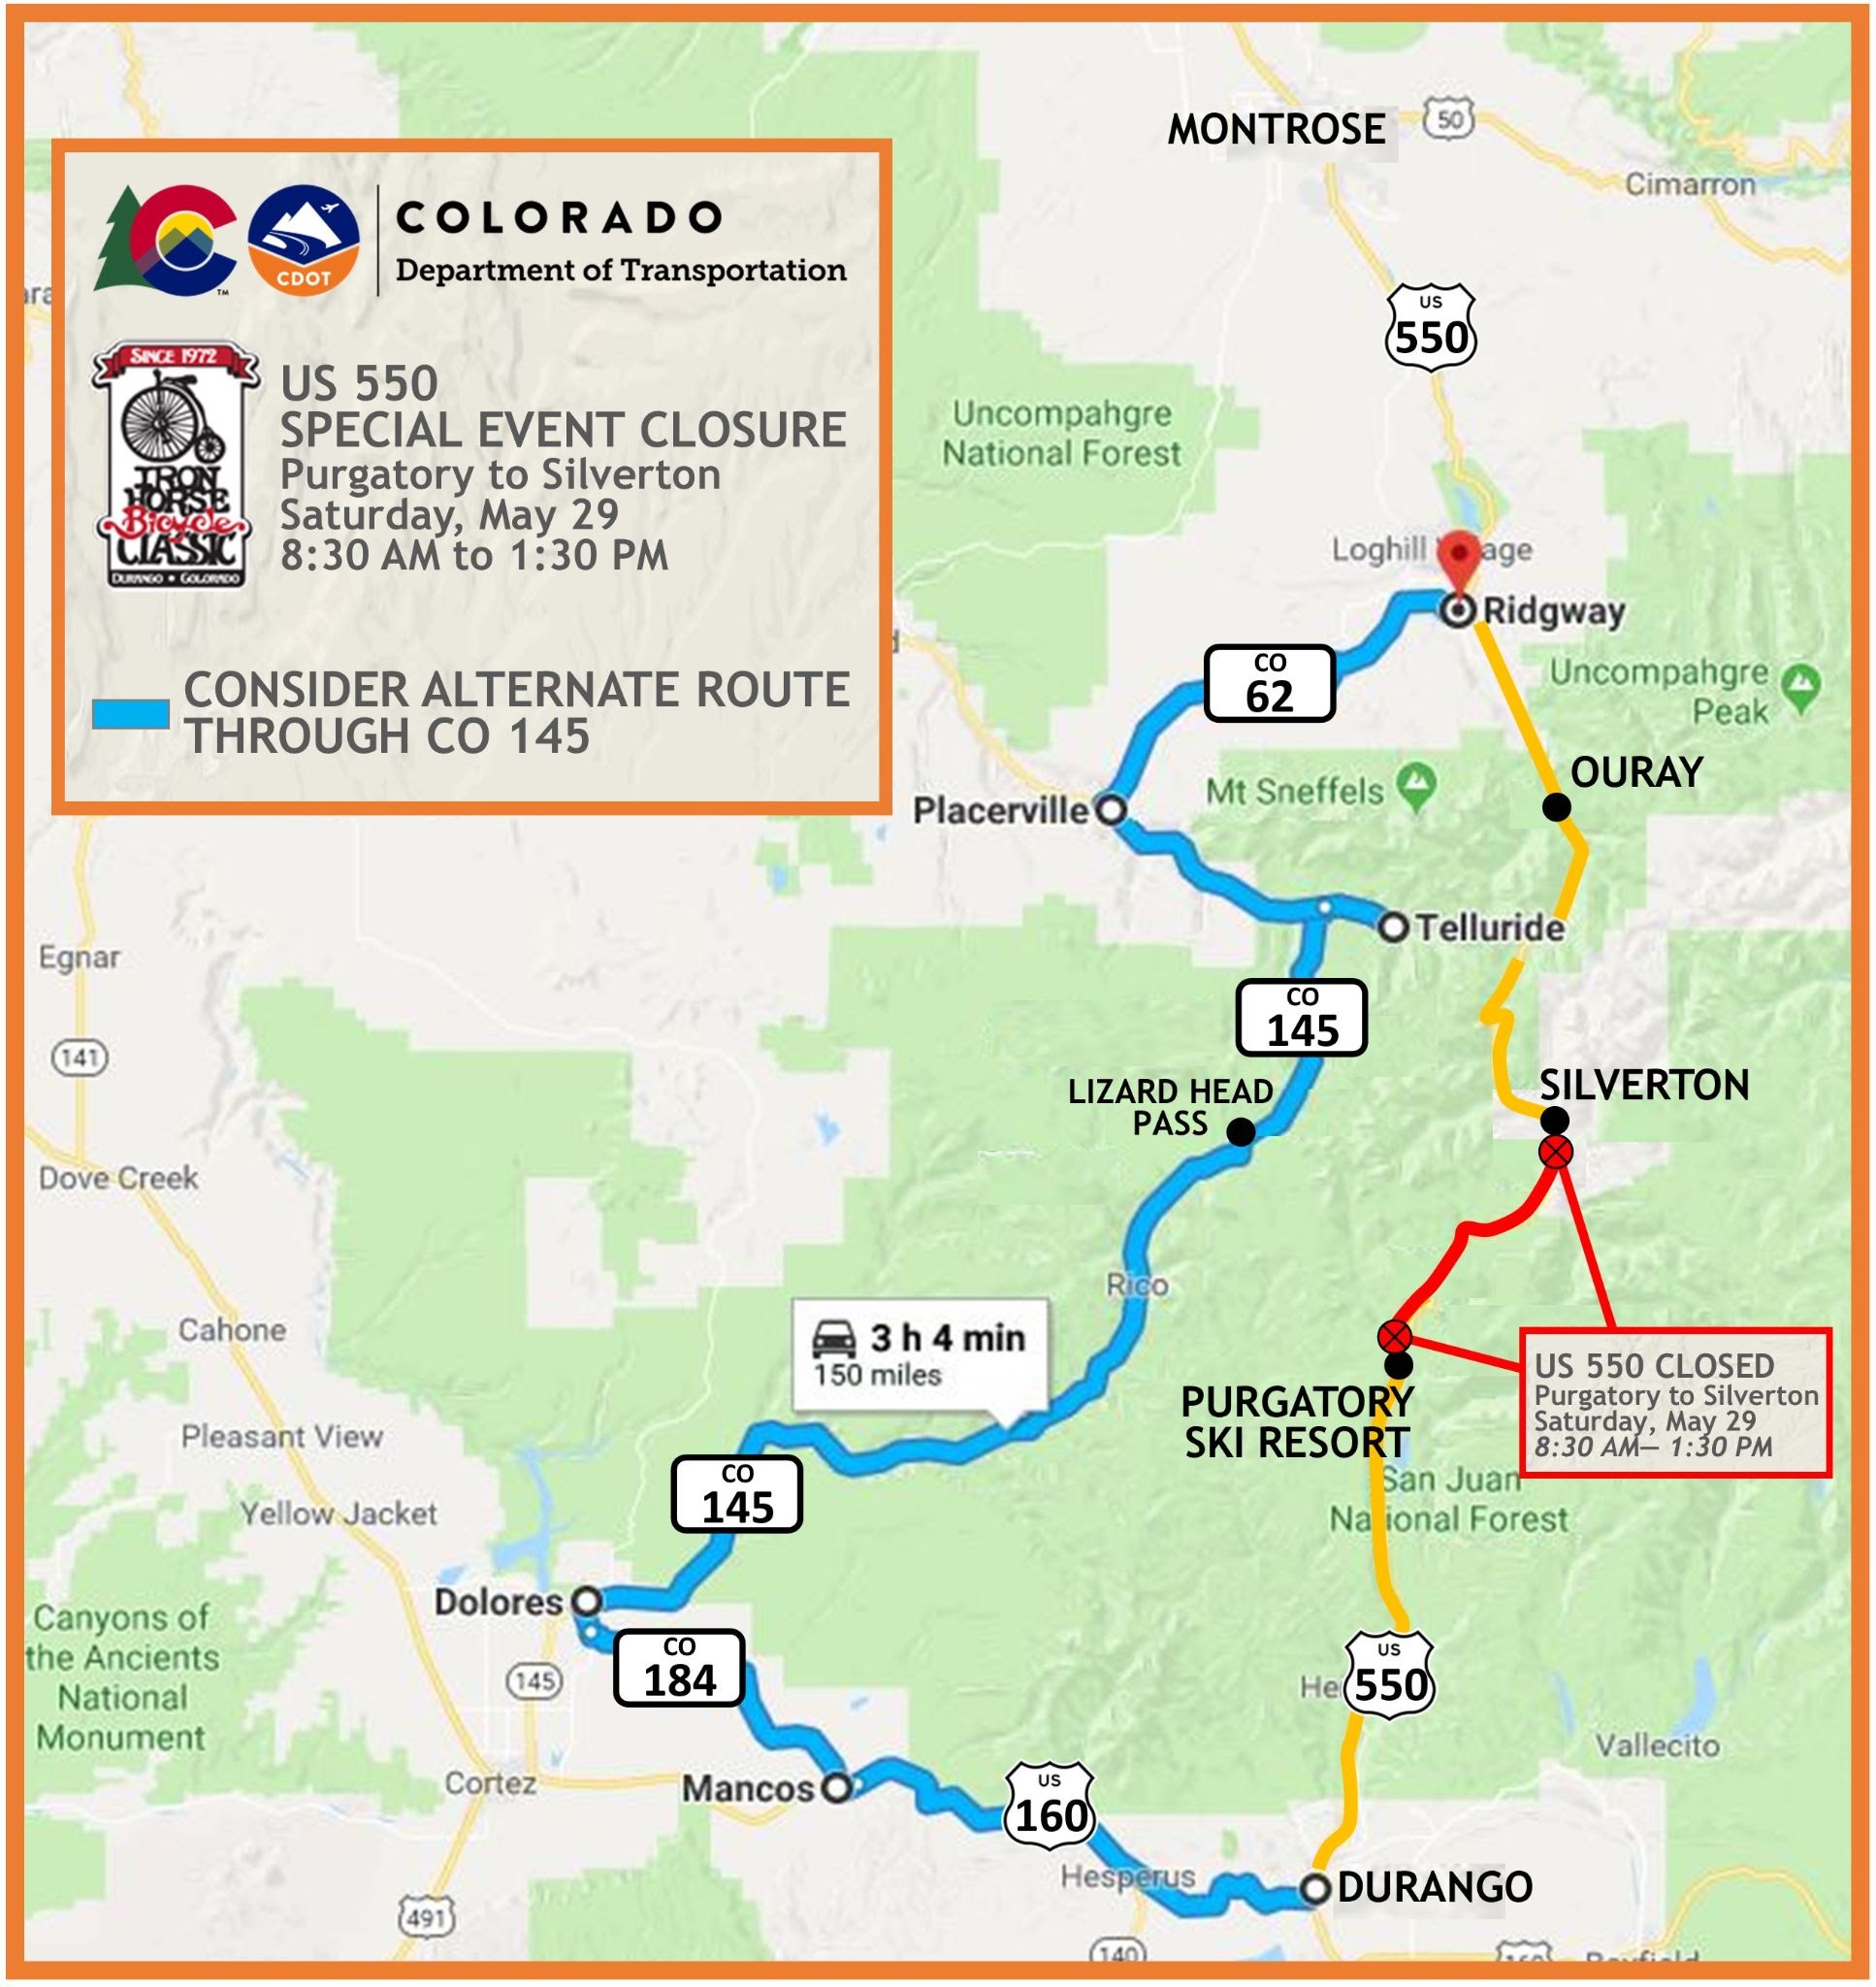 CO 145 Alt Route_US 550 IronHorse_May2021.jpg detail image